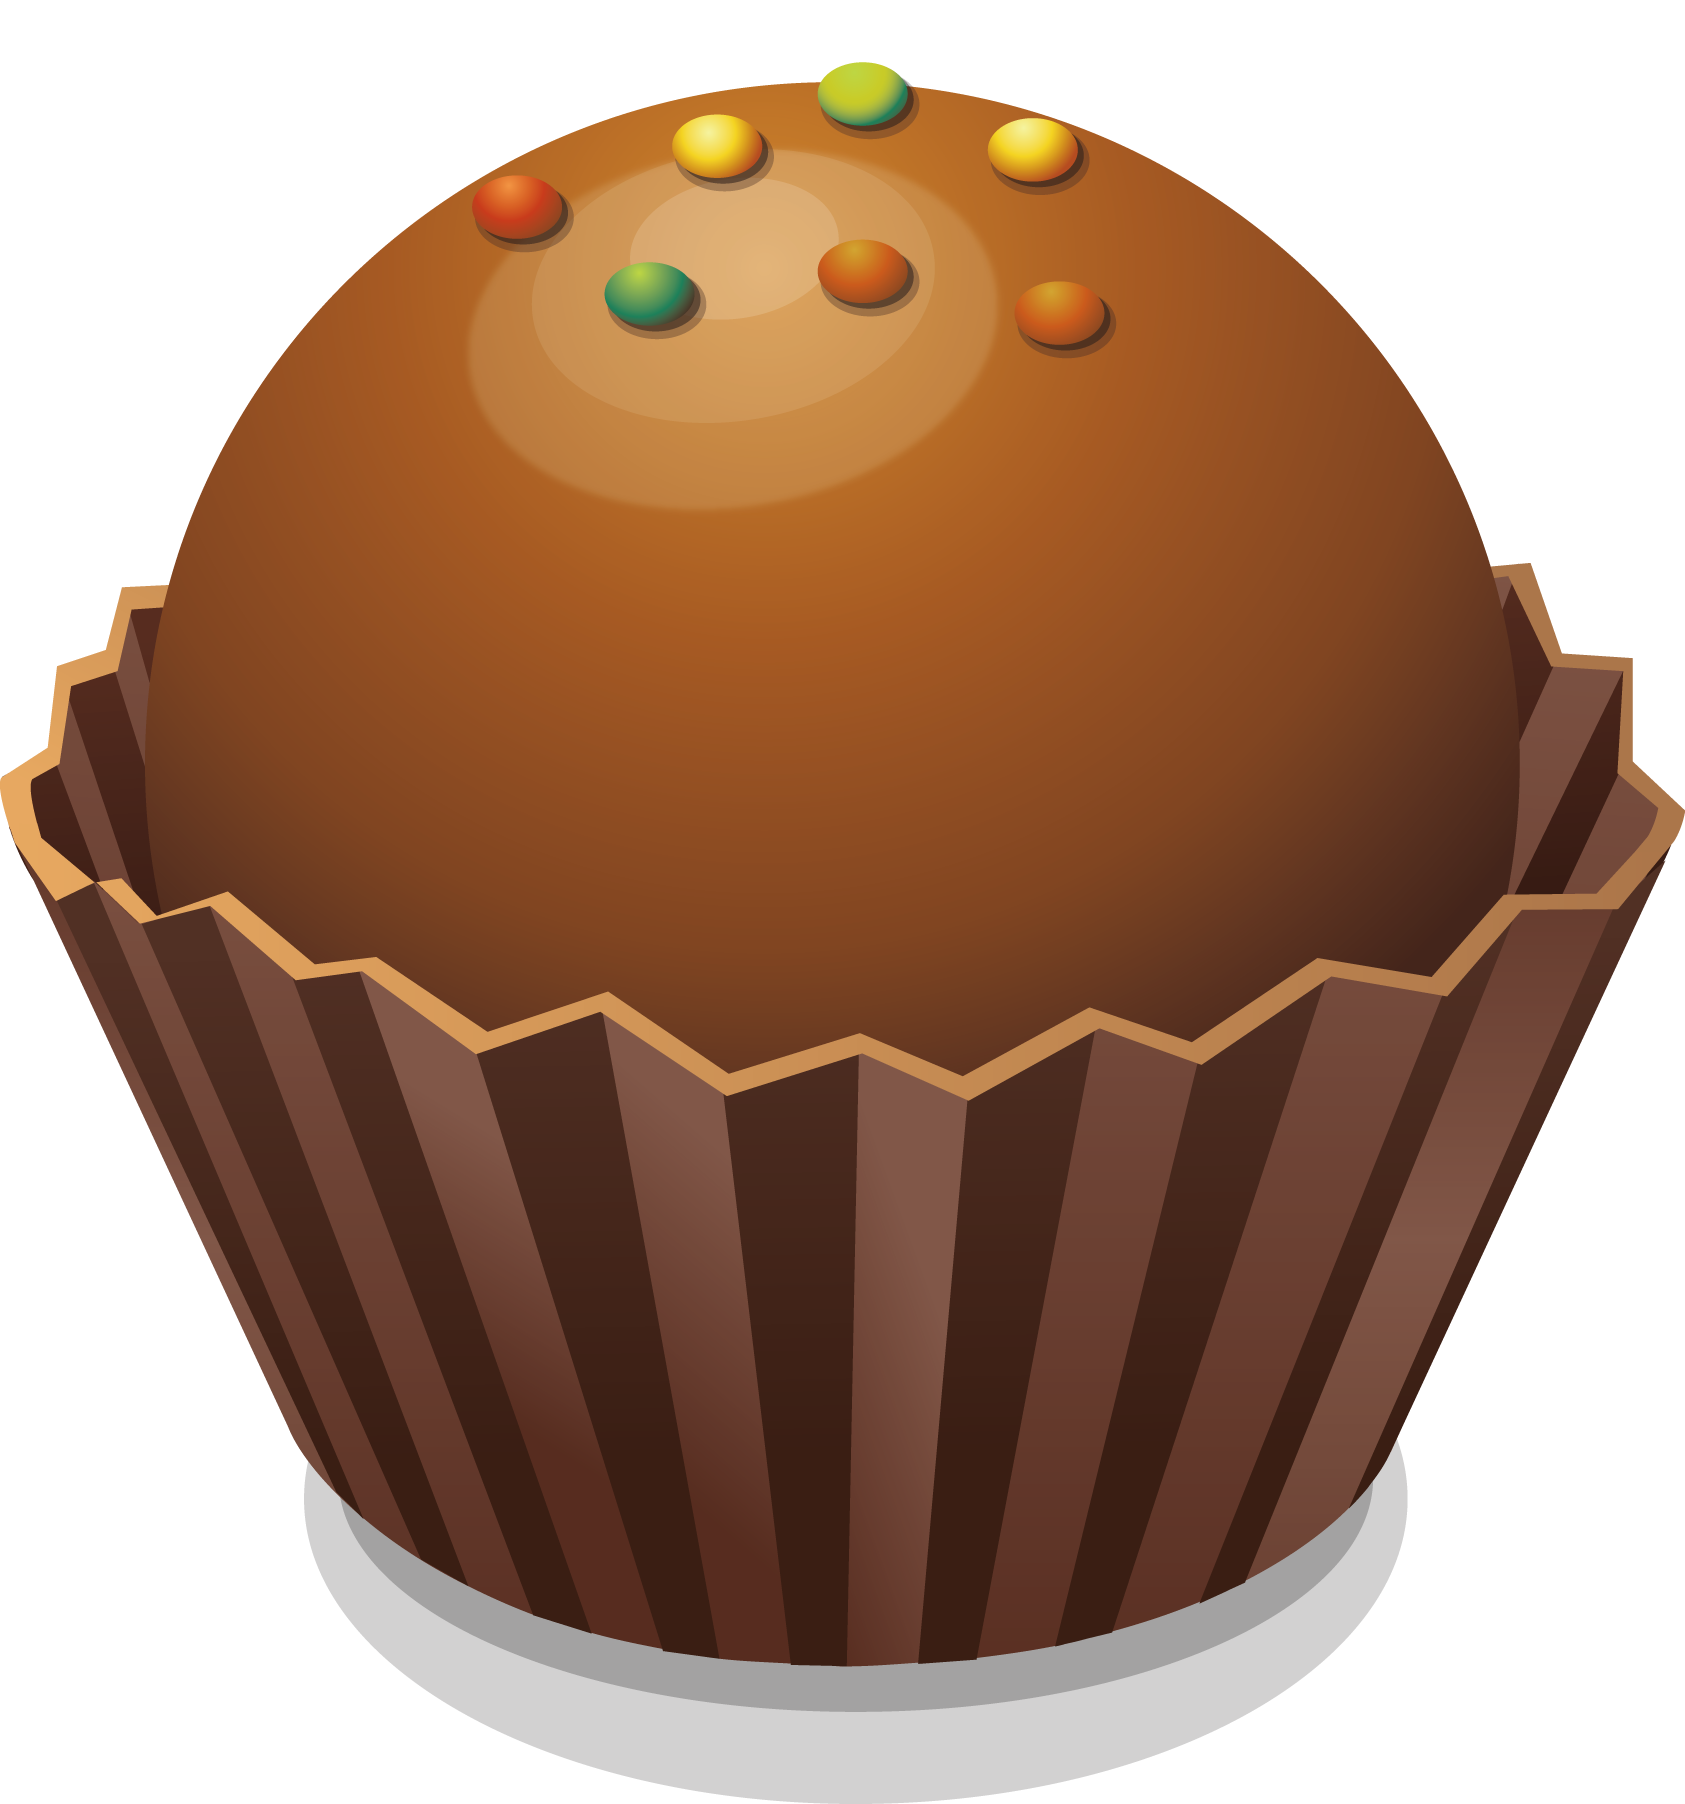 desserts clipart baked sweet